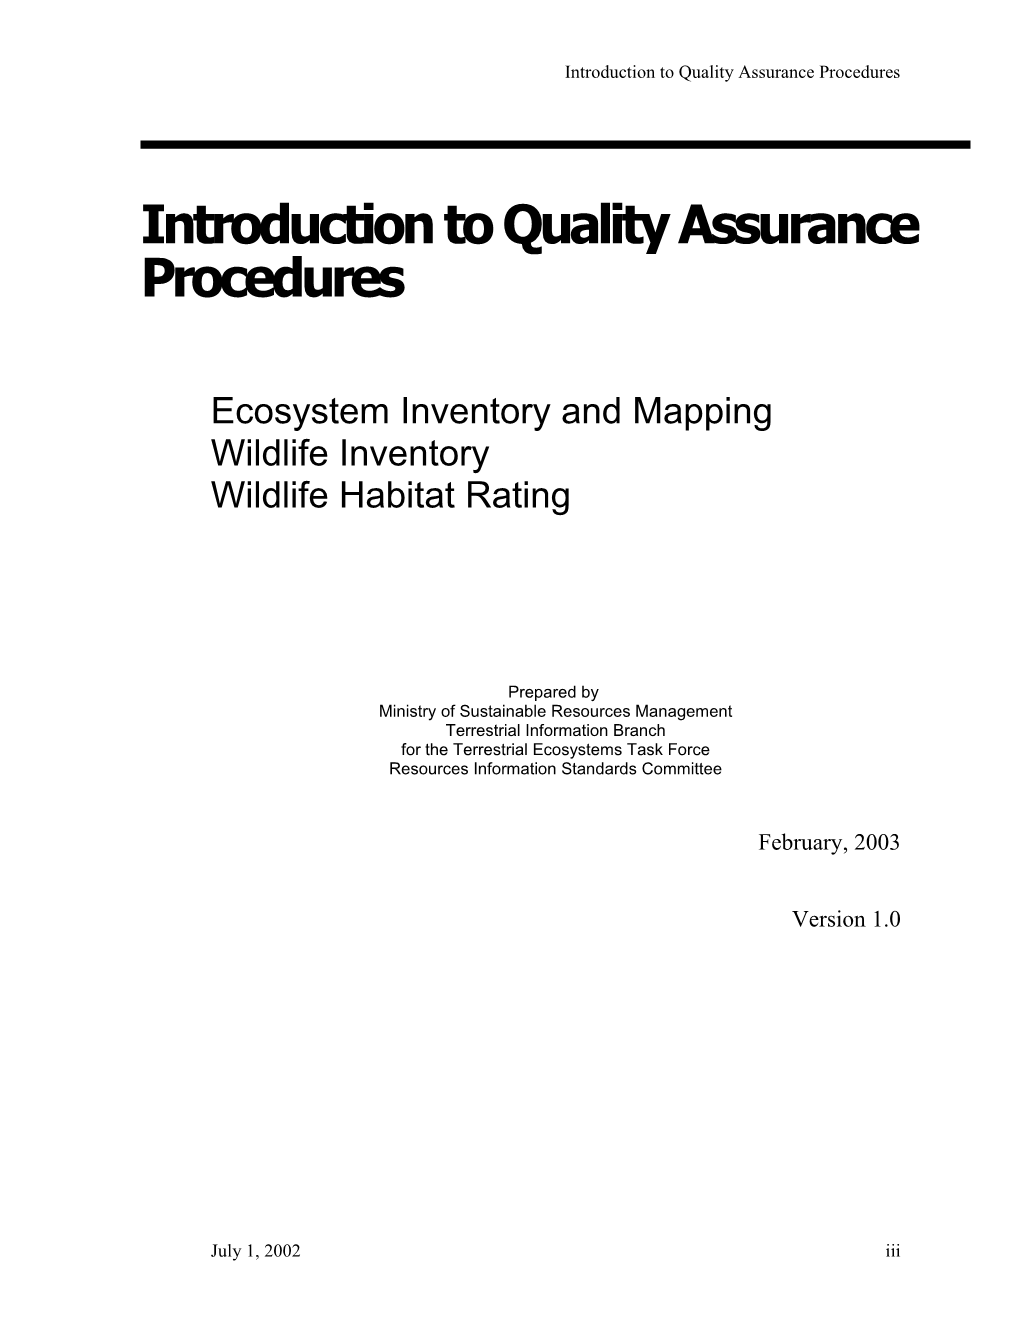 Introduction to Quality Assurance Procedures